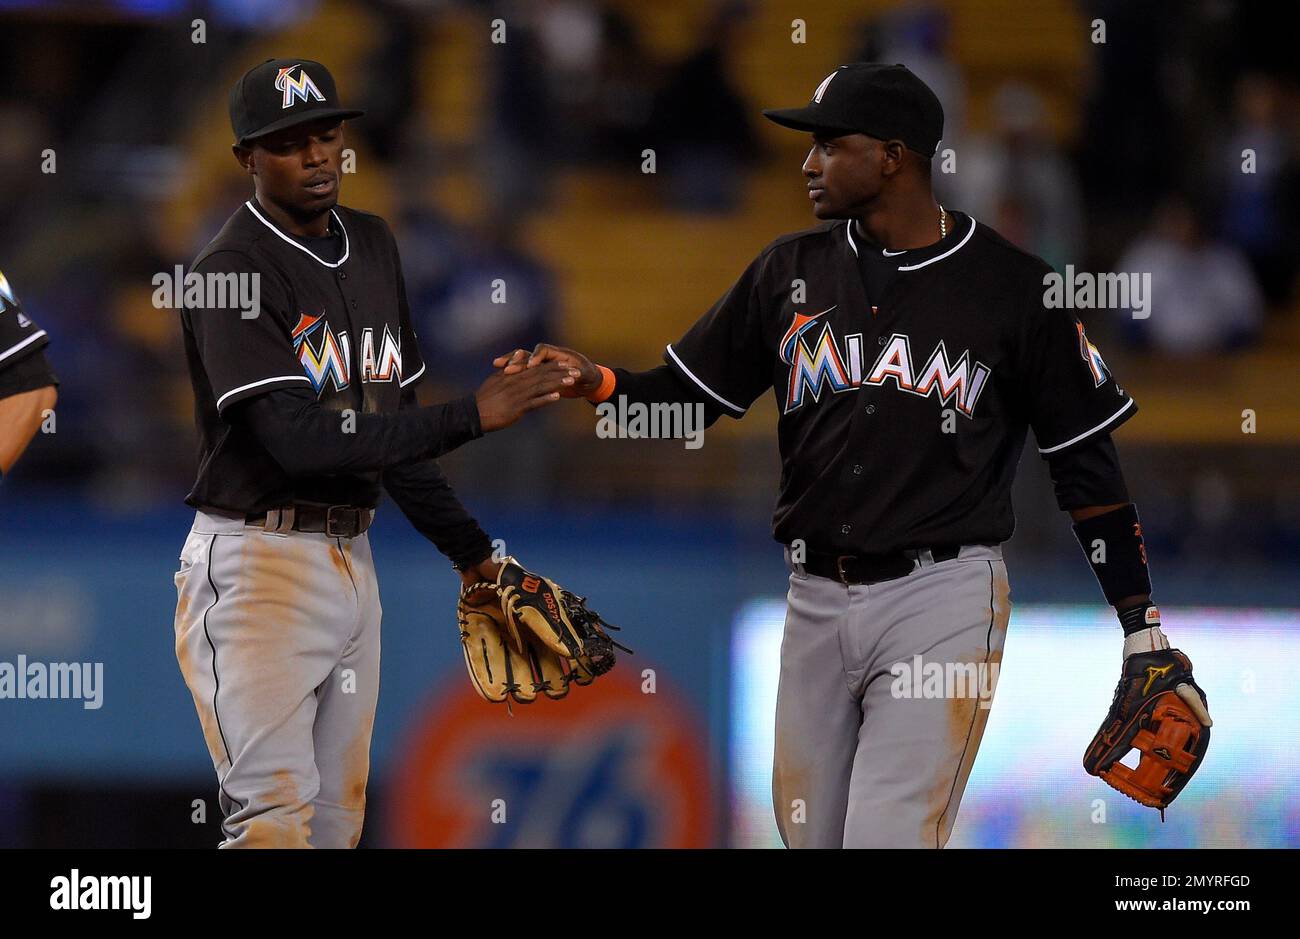 Miami Marlins second baseman Dee Gordon and shortstop Adeiny Hechavarria  congratulate each other after the Marlins defeated the Los Angeles Dodgers  5-3 in a baseball game, Thursday, April 28, 2016, in Los